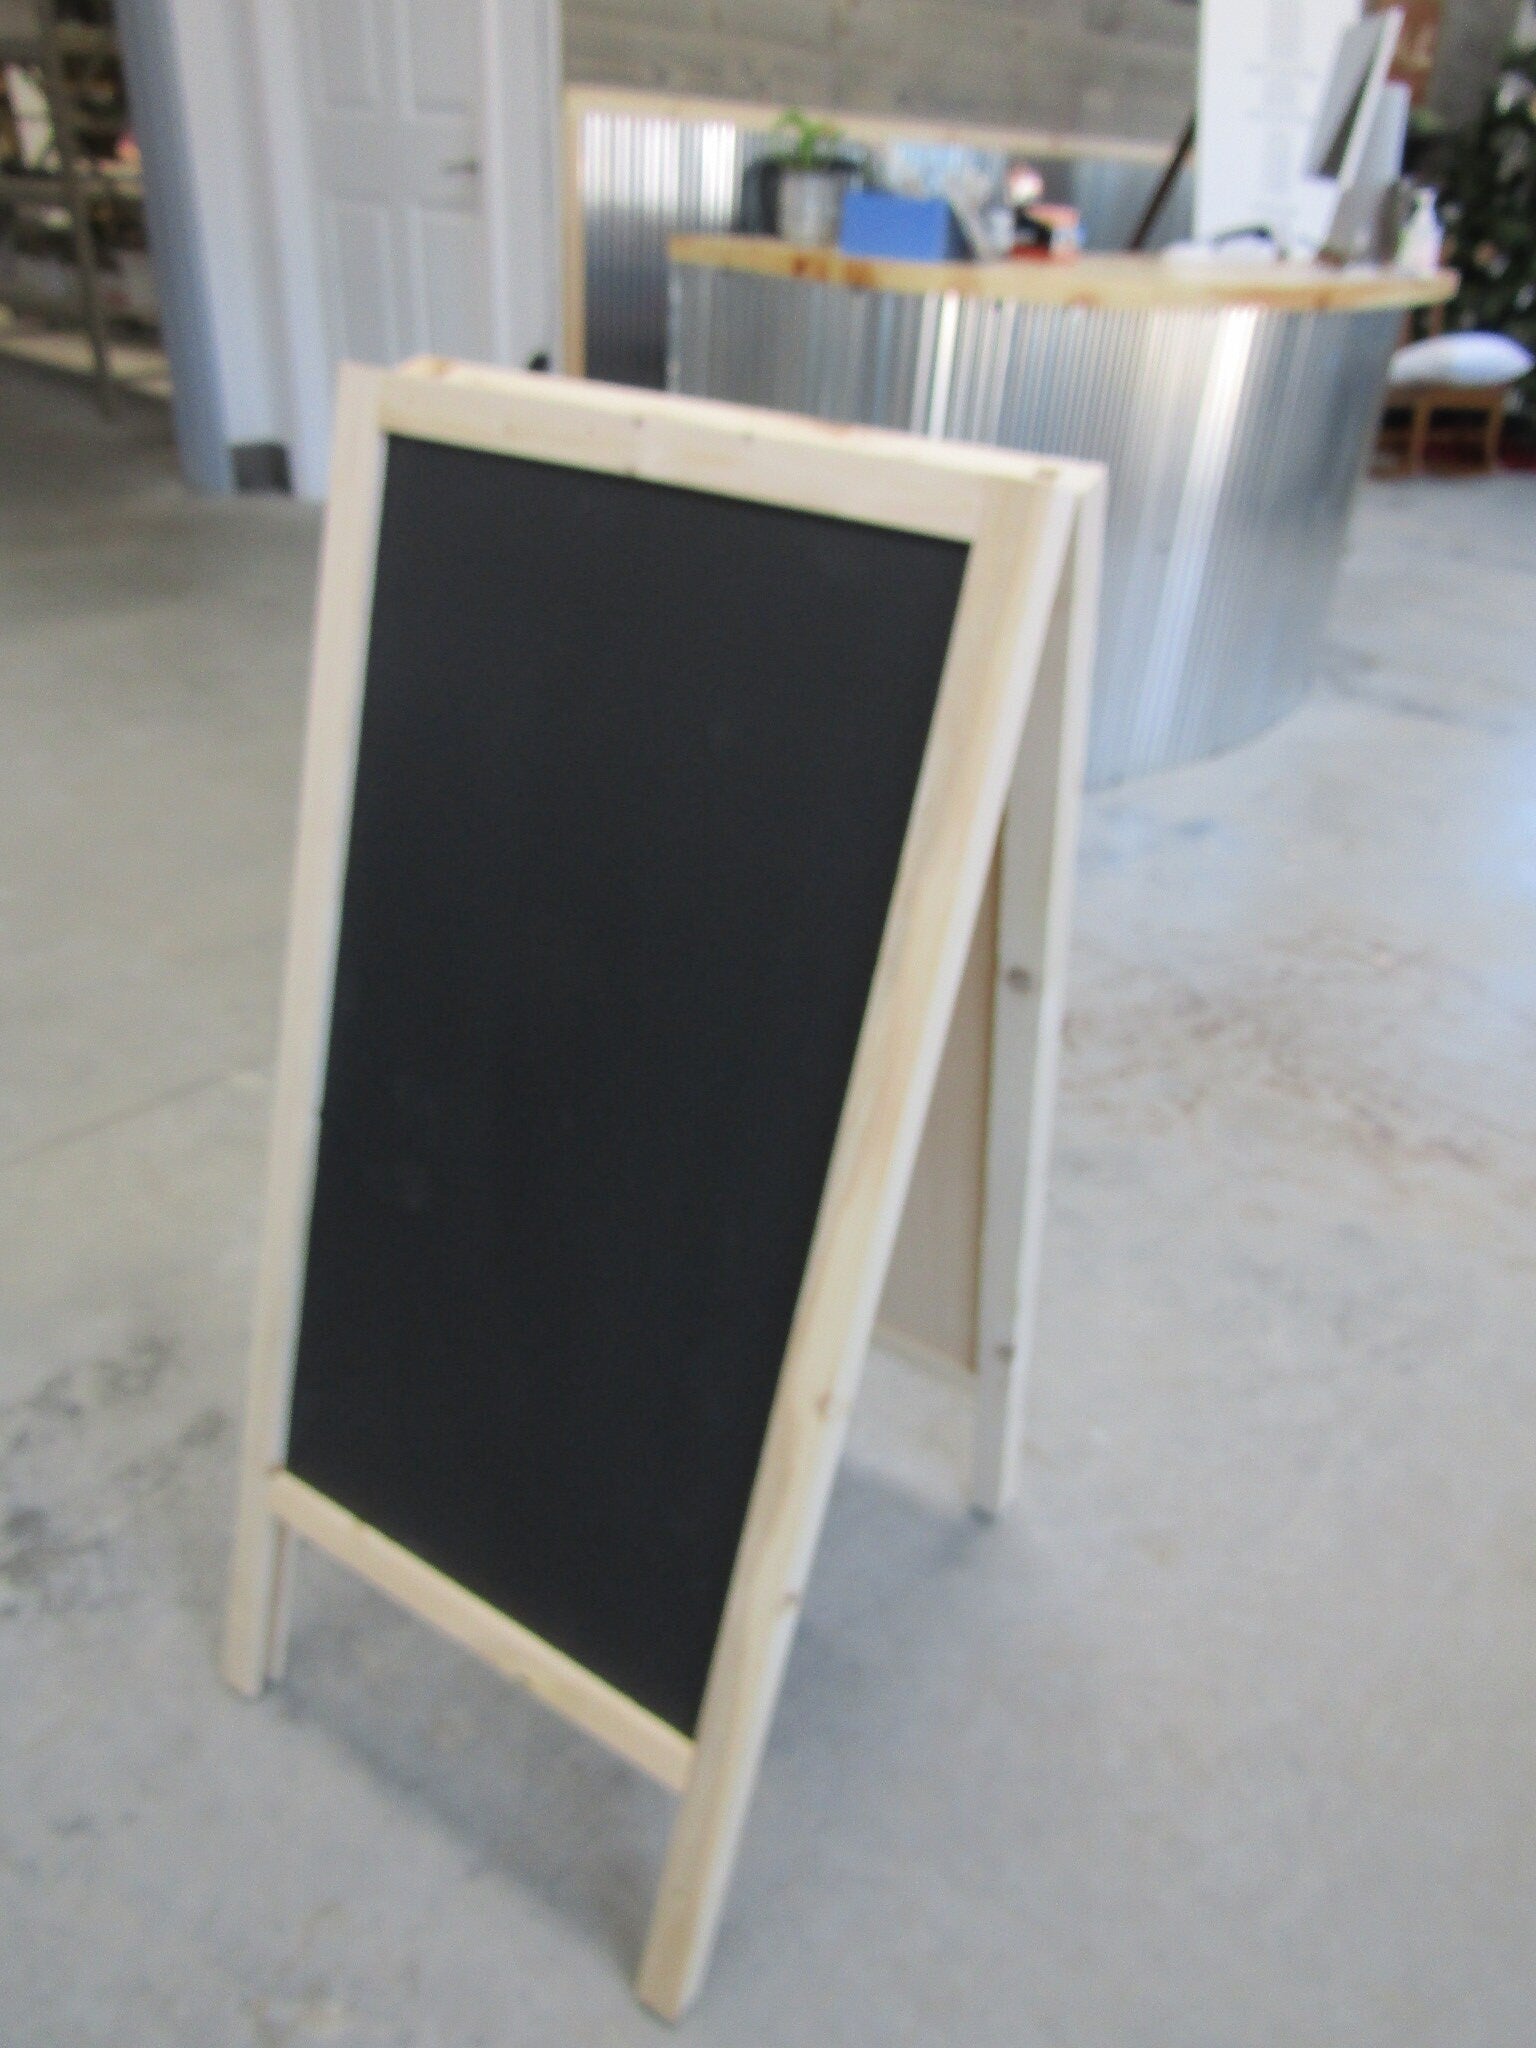 Chalk Board Daily Specials Sidewalk Sandwich Board A Frame Folding Affordable Info Sign Free Standing Extra Large Commercial Hinge Outdoor